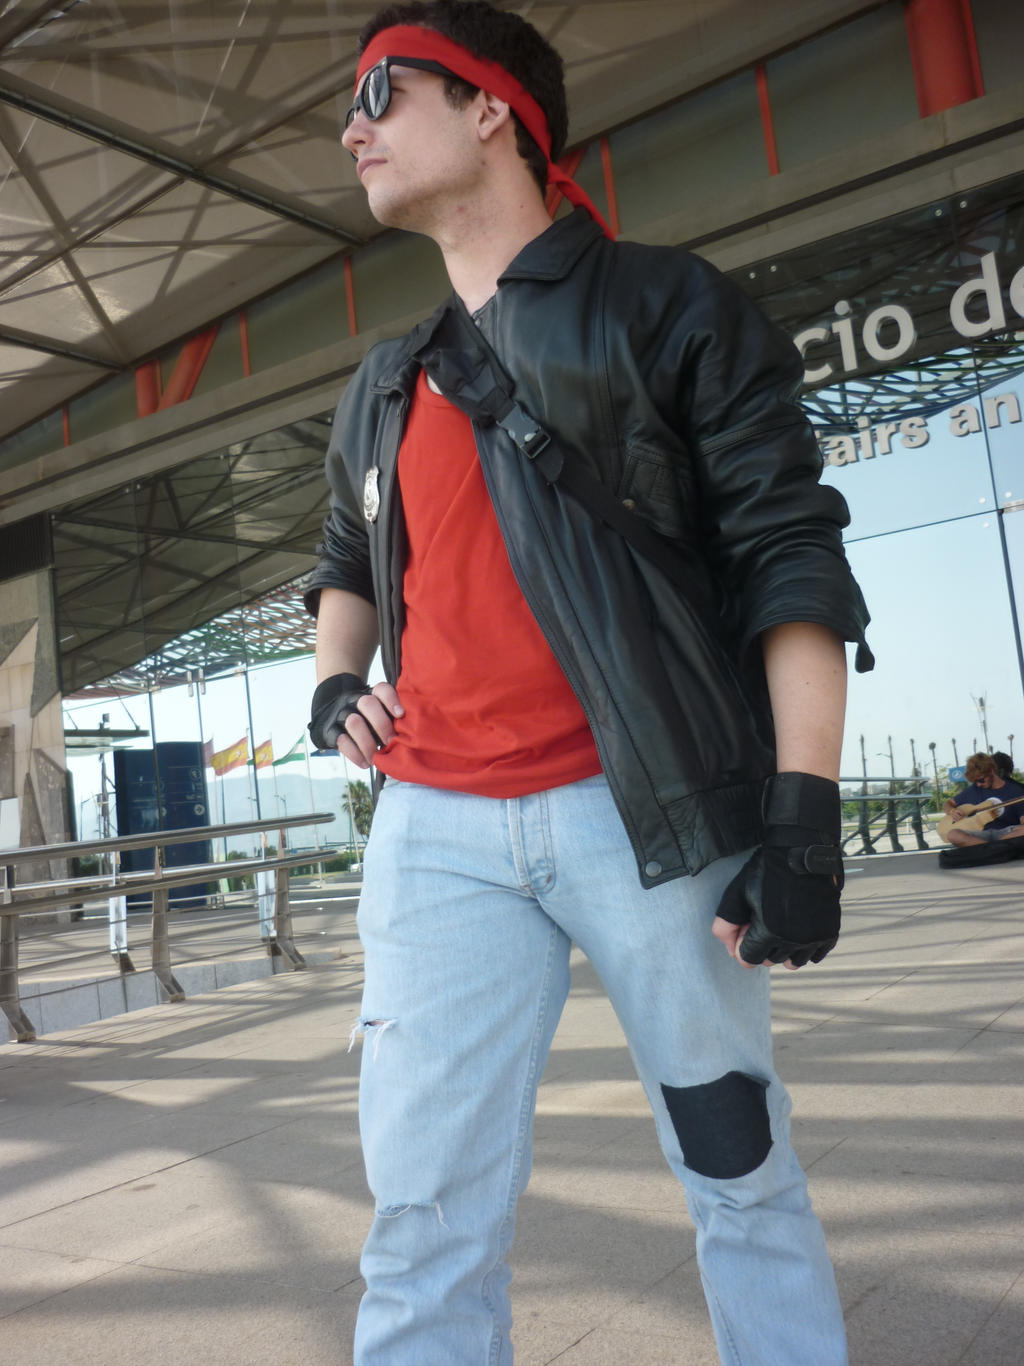 Kung Fury Cosplay 2 by d4rkslayer on DeviantArt